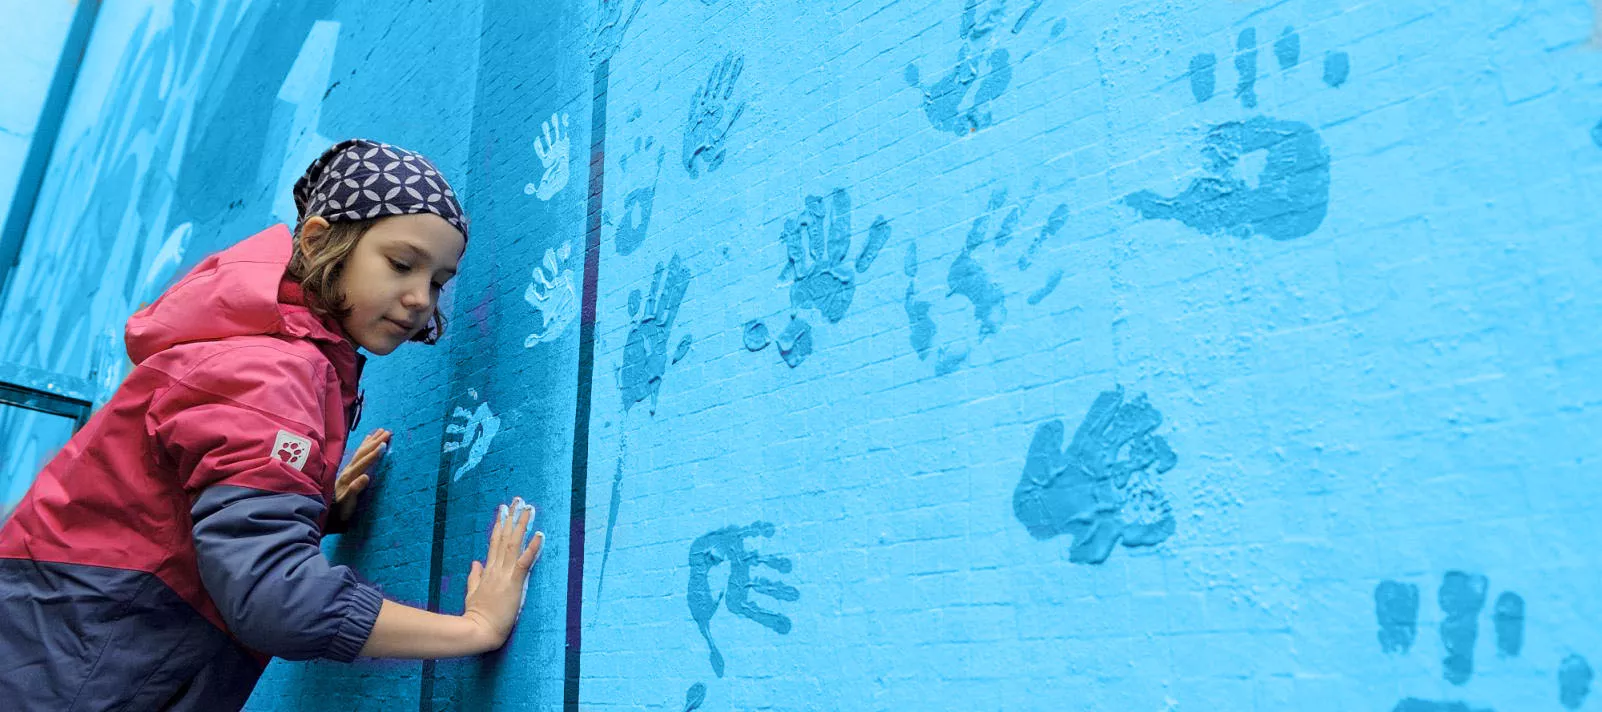 Girl painting UNICEF mural on the wall of her school in Belgrade, Serbia